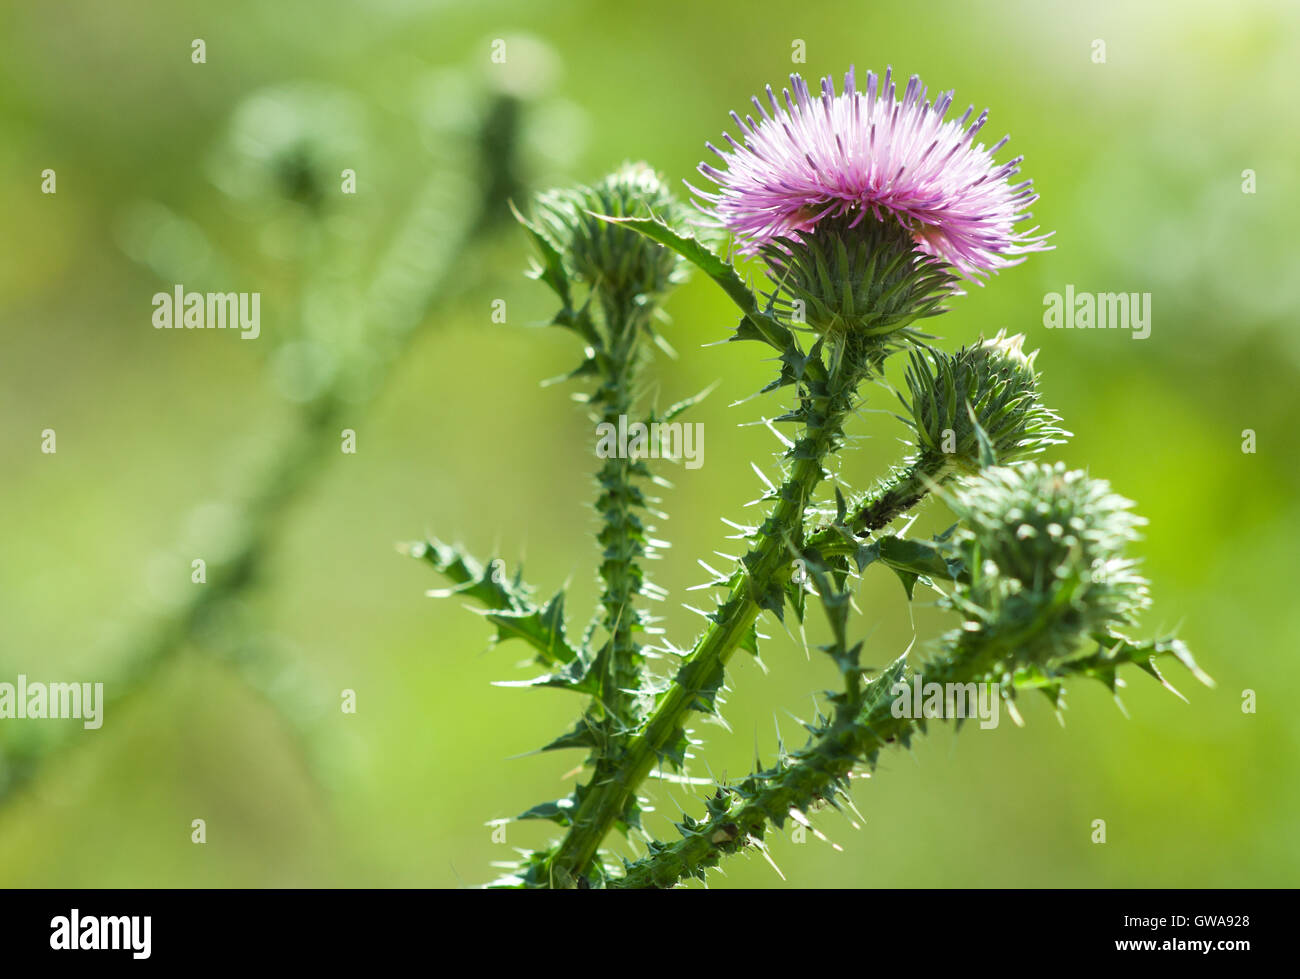 Natural environmental seasonal spring image: thistle flower and buds closeup with green background of other plants. Stock Photo